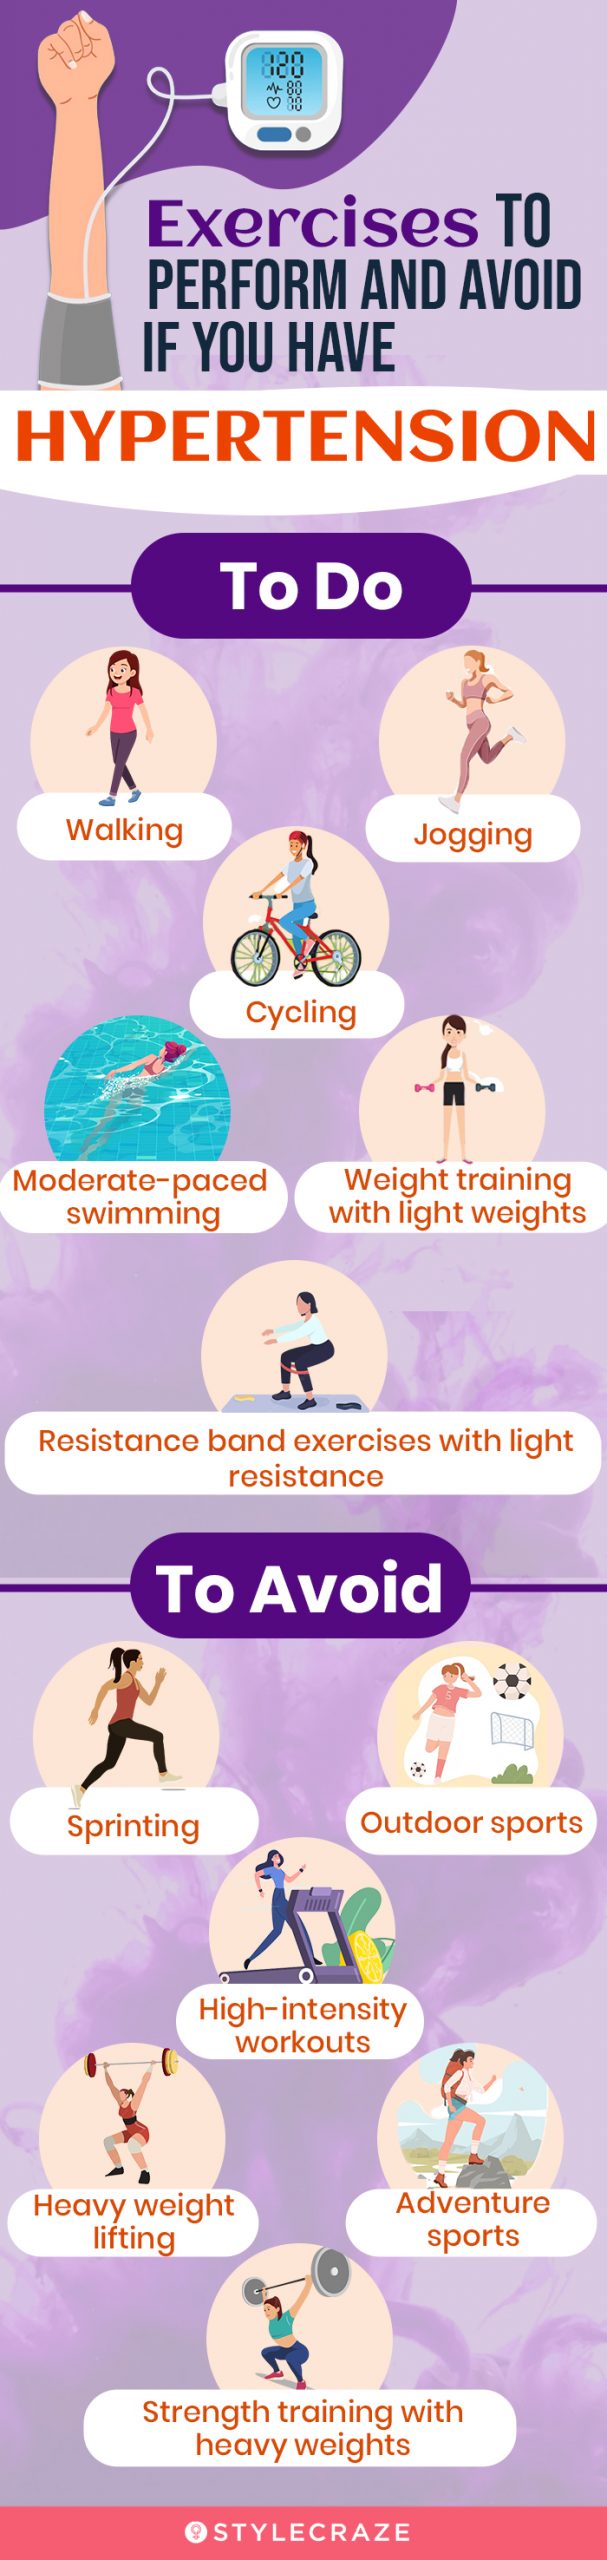 excerise to perform and avoid if you have hypertension (infographic)